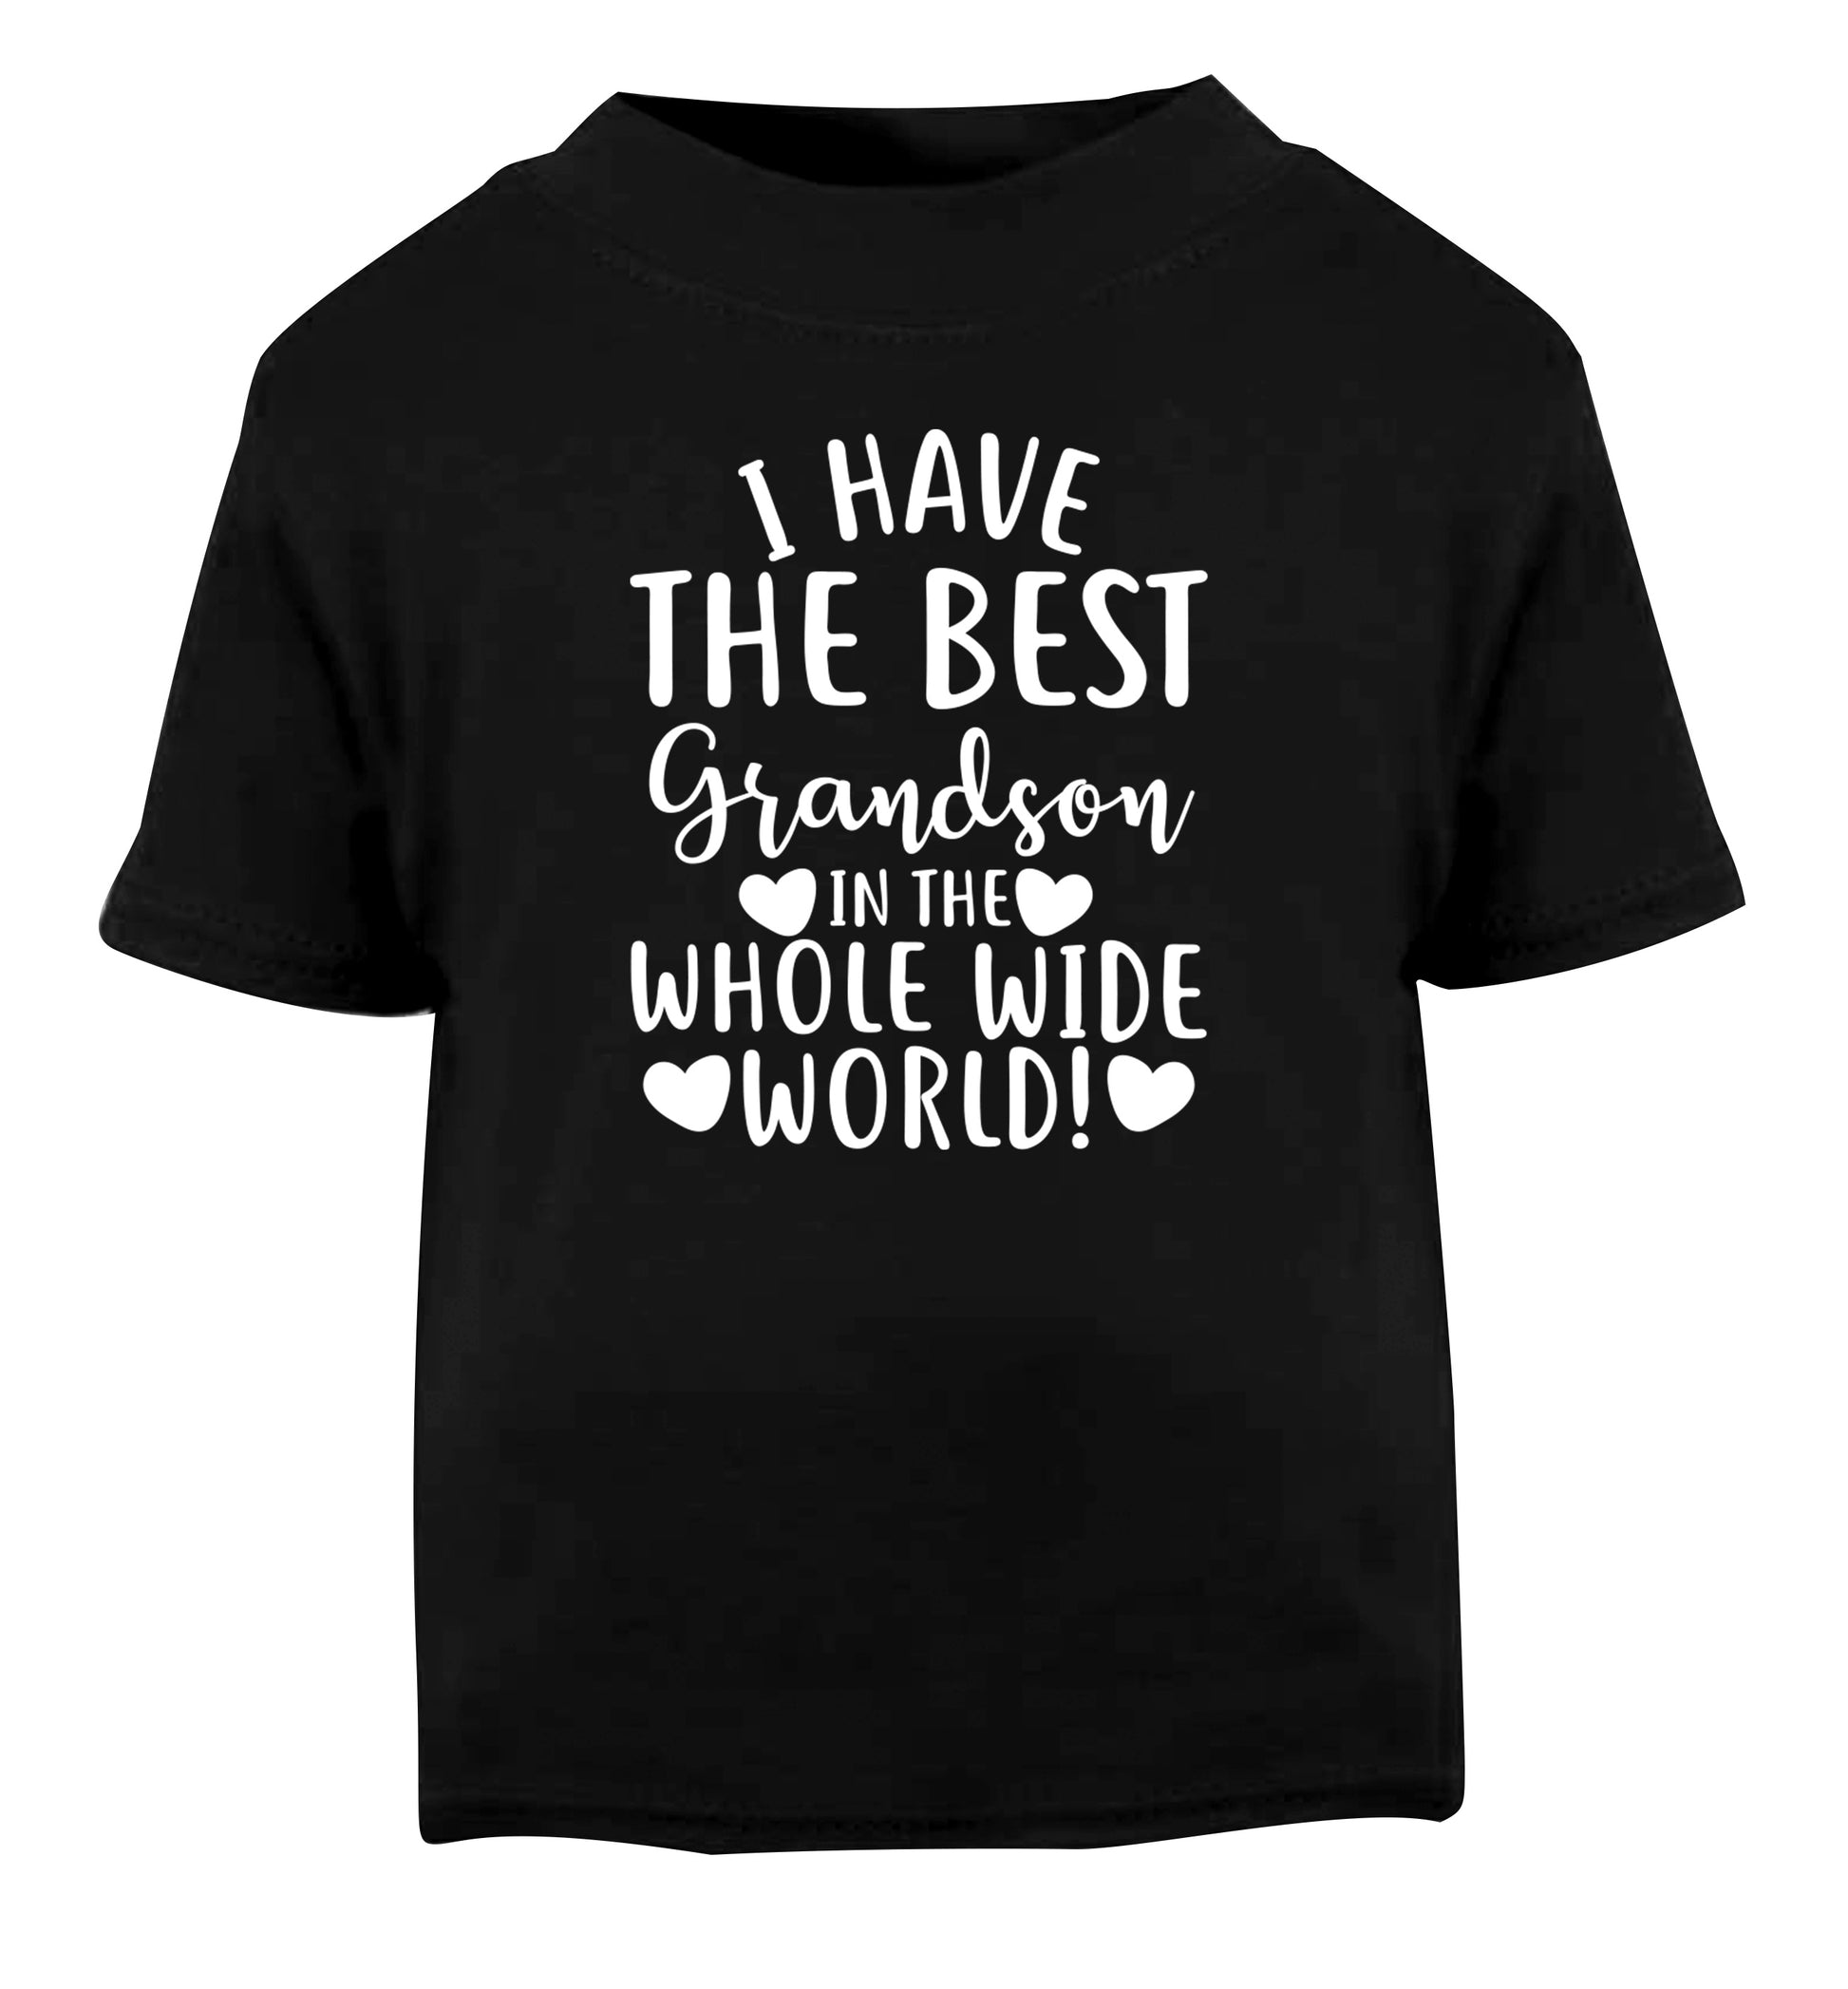 I have the best grandson in the whole wide world! Black Baby Toddler Tshirt 2 years